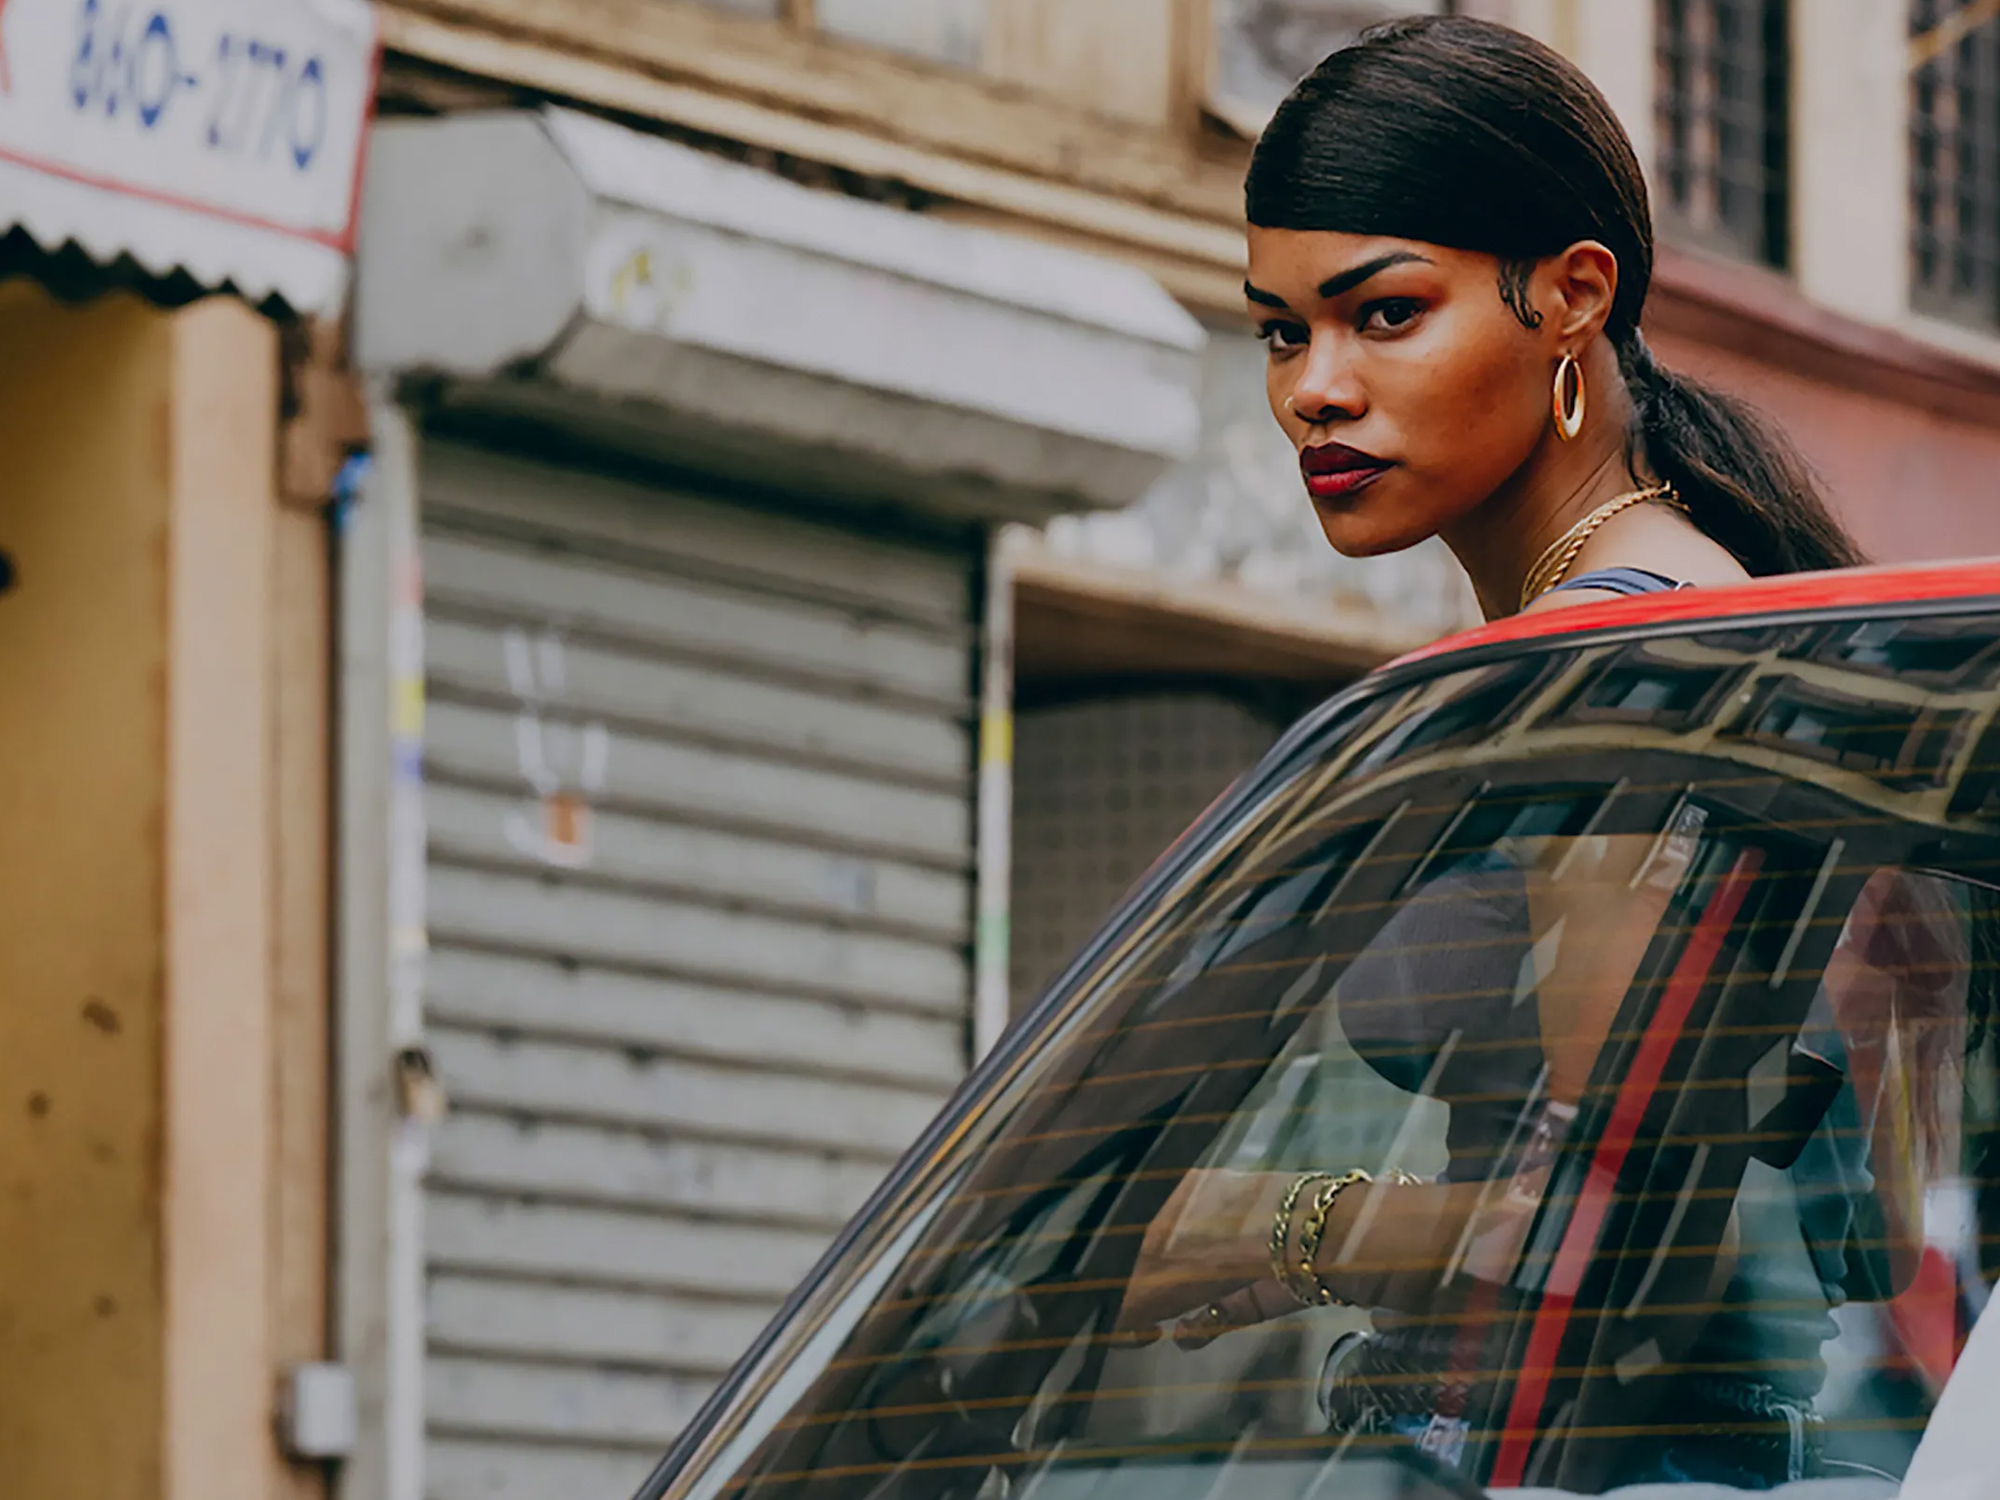 A Thousand And One review – Teyana Taylor shines